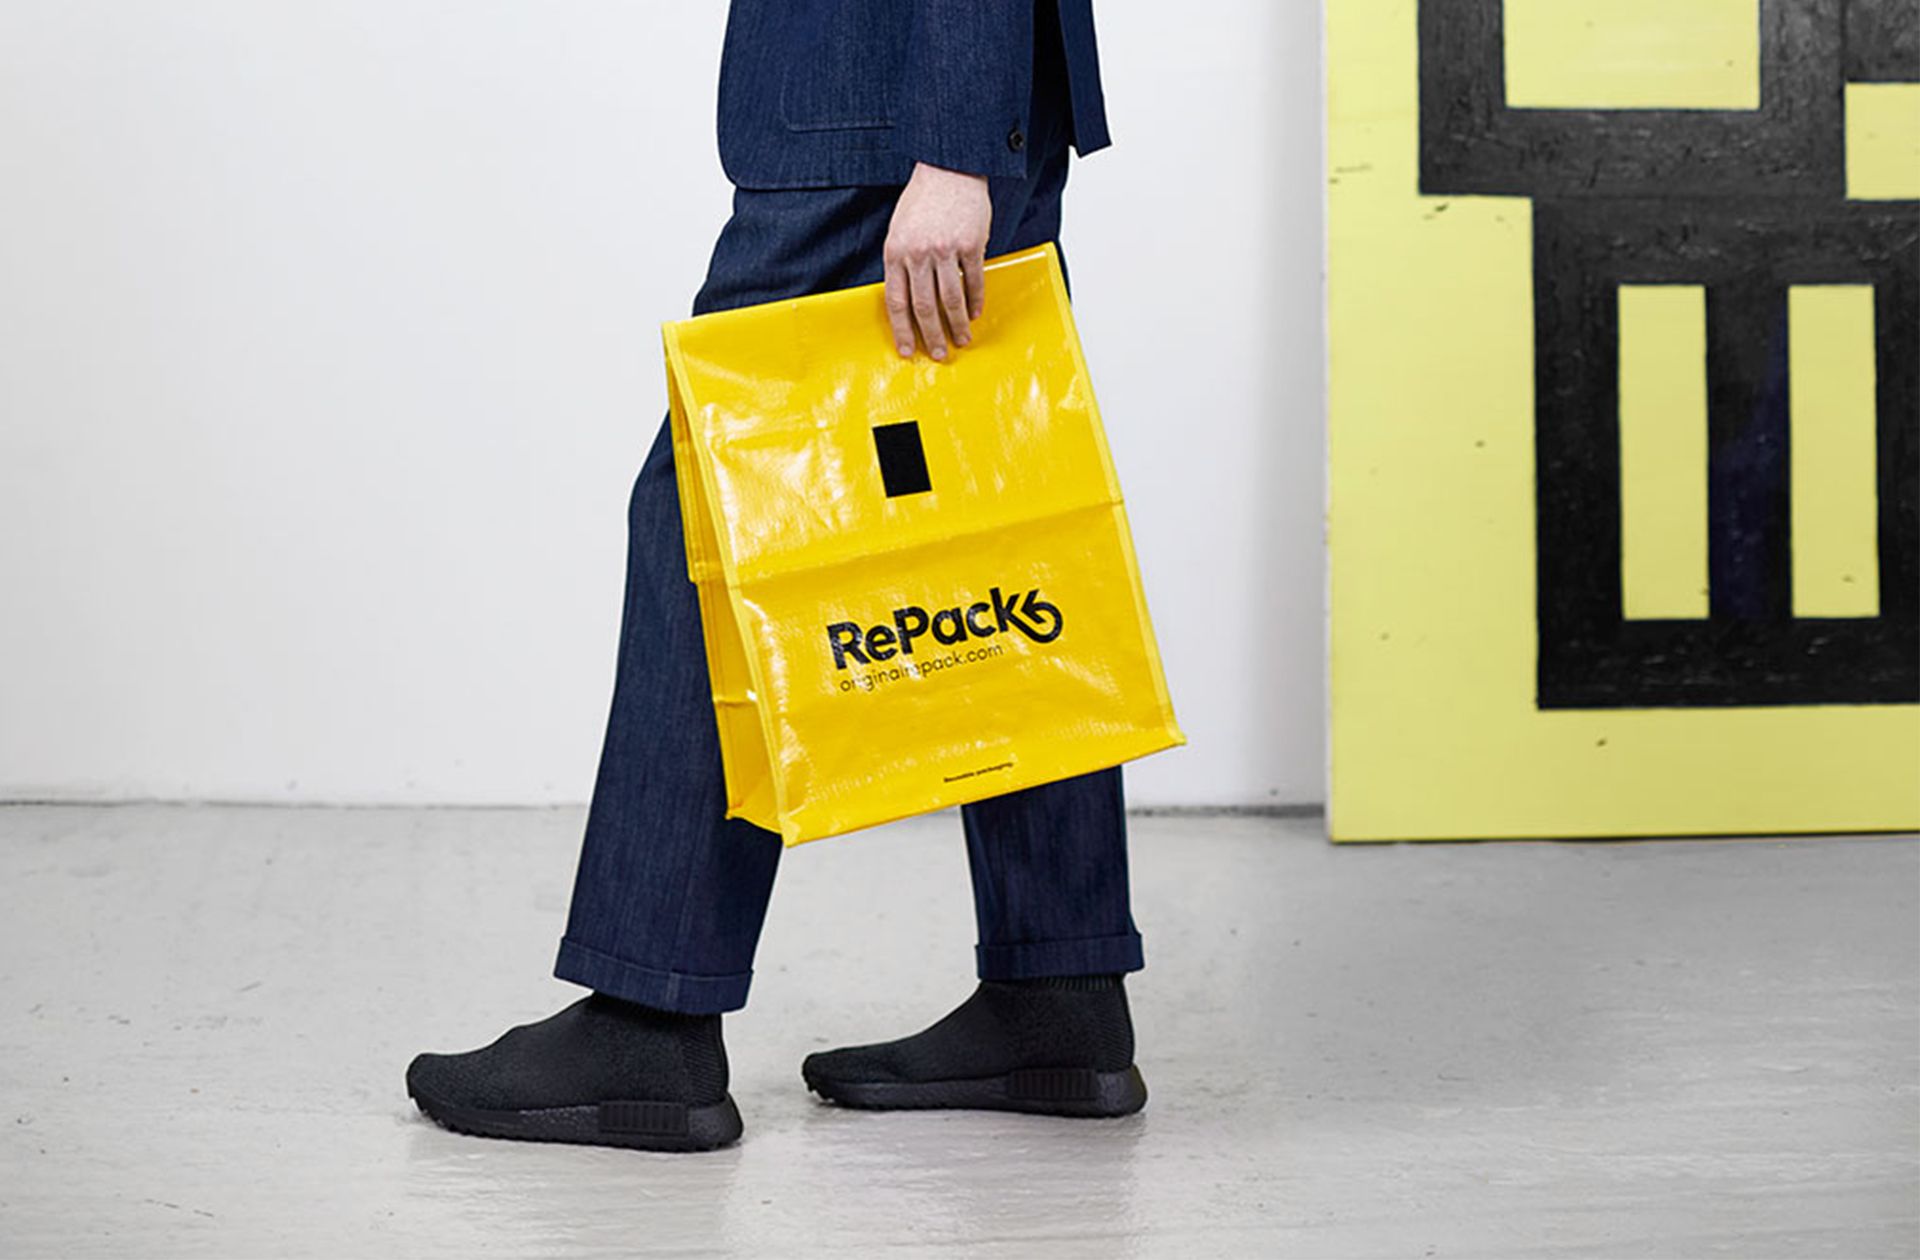 RePack, a reusable packaging service for webstores, replaces single-use packaging for online orders, which is otherwise disposed of by the ton. Customers can return their order packaging from anywhere in the world free of charge, simply by posting it in a mailbox in letter size. The returned packaging is cleaned and shipped back to the webstores participating in the project.